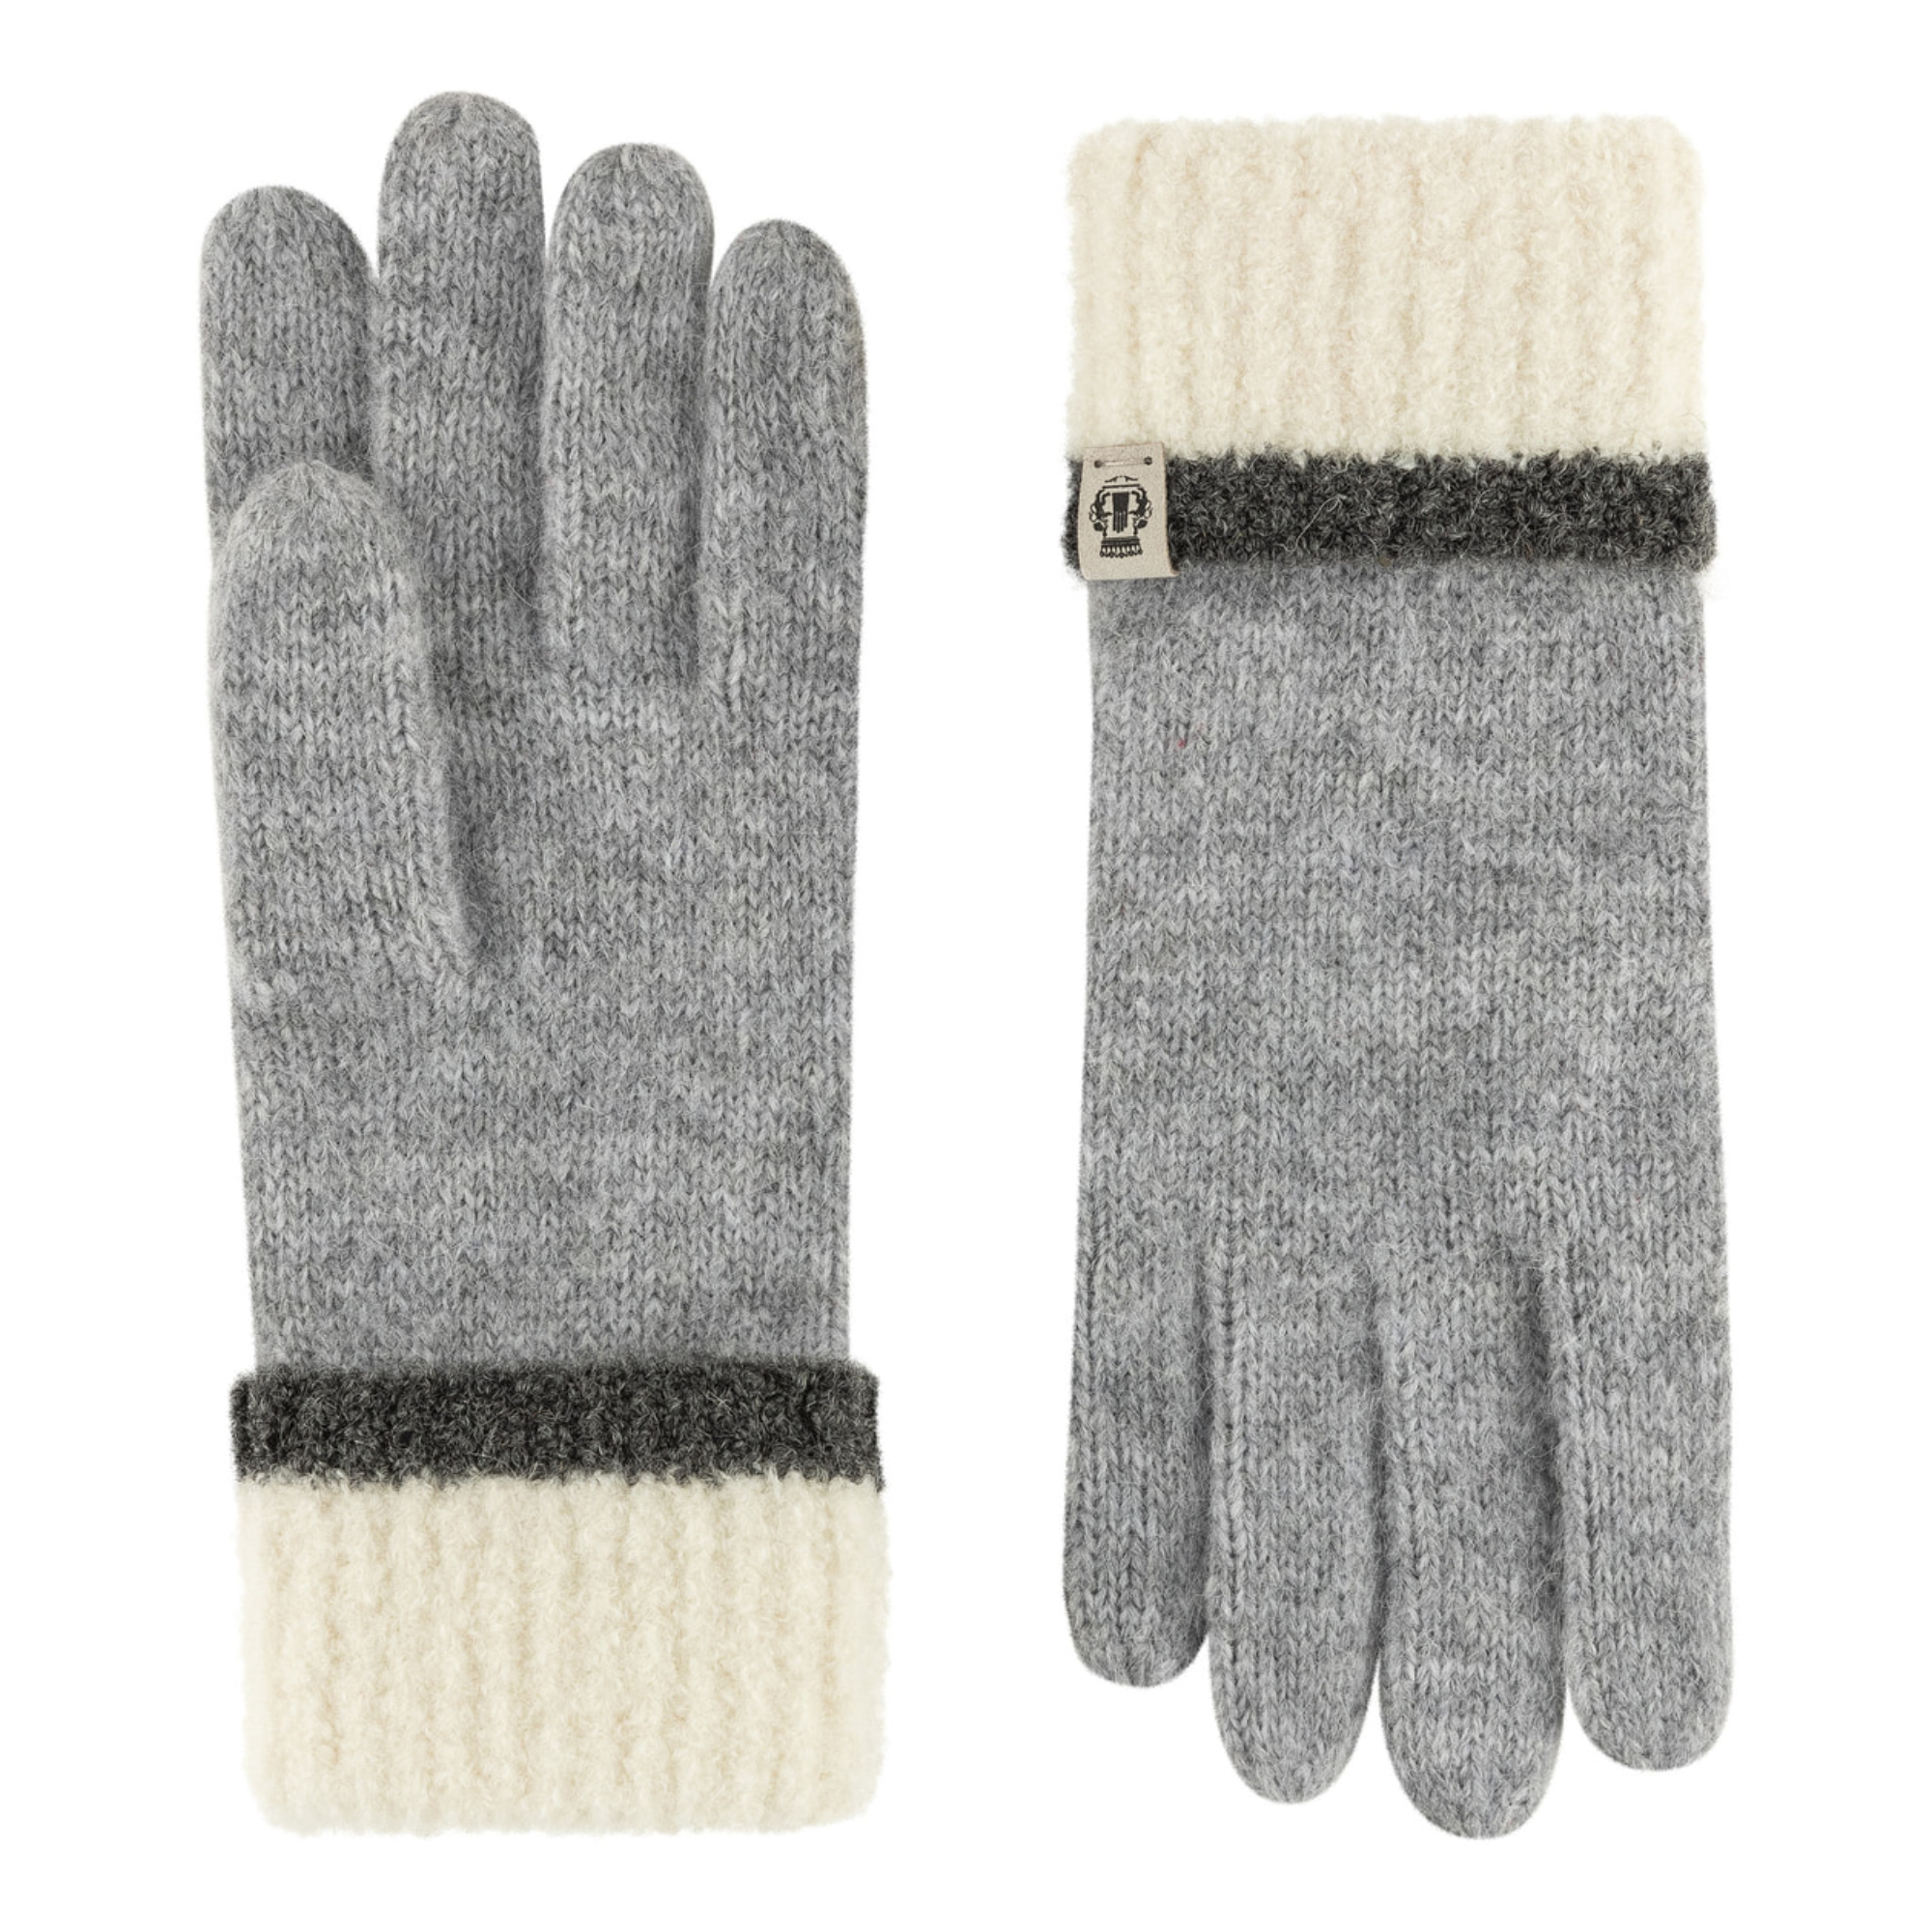 Funhouse Handschuh multi grey One Size